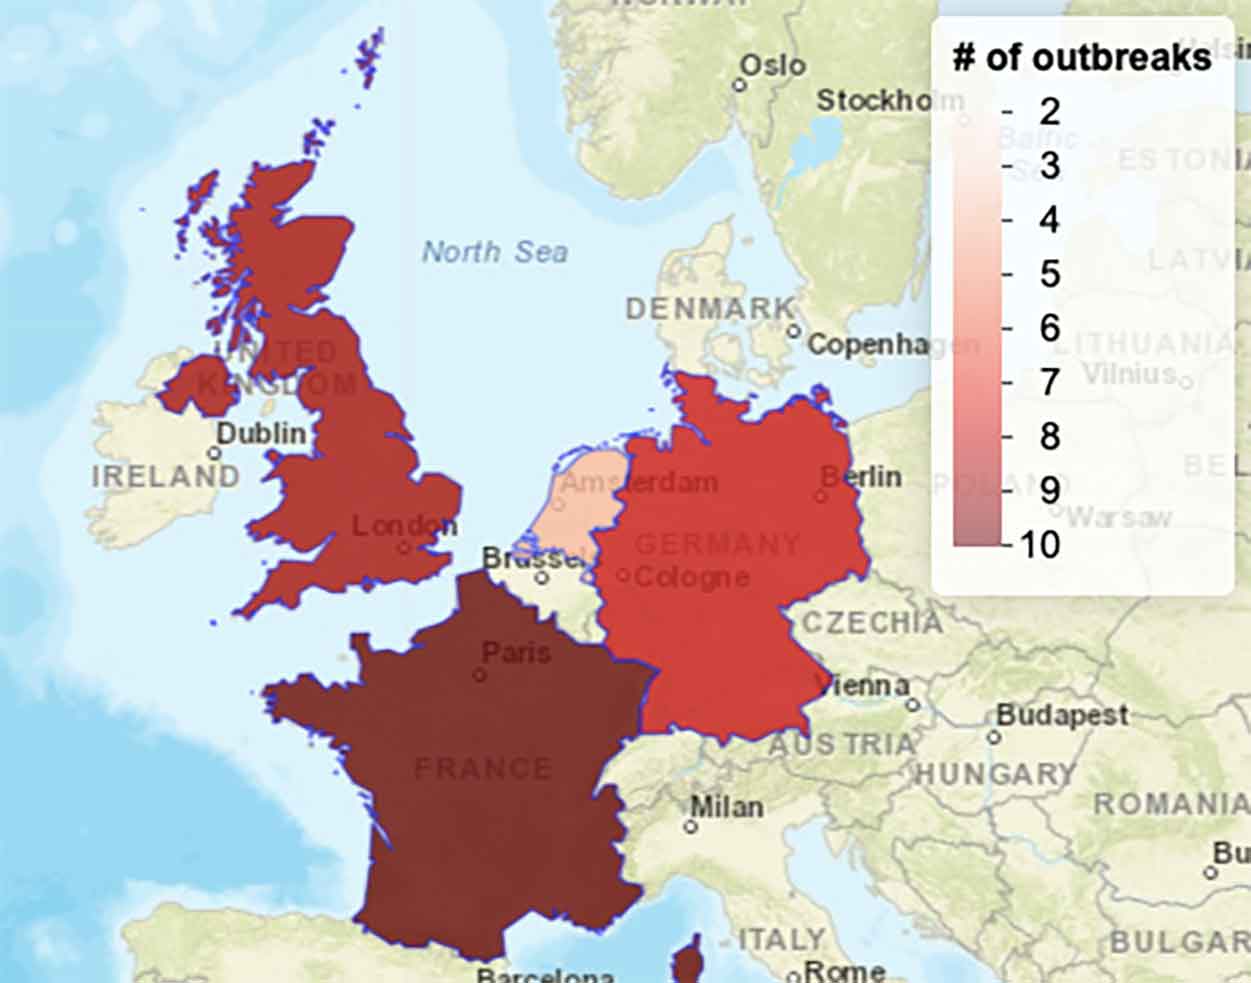 Figure 5. Choropleth map depicting the location and frequency of equine influenza outbreak reports in Europe for 1 December 2020 to 12 April 2021. Source: EquiFluNet.